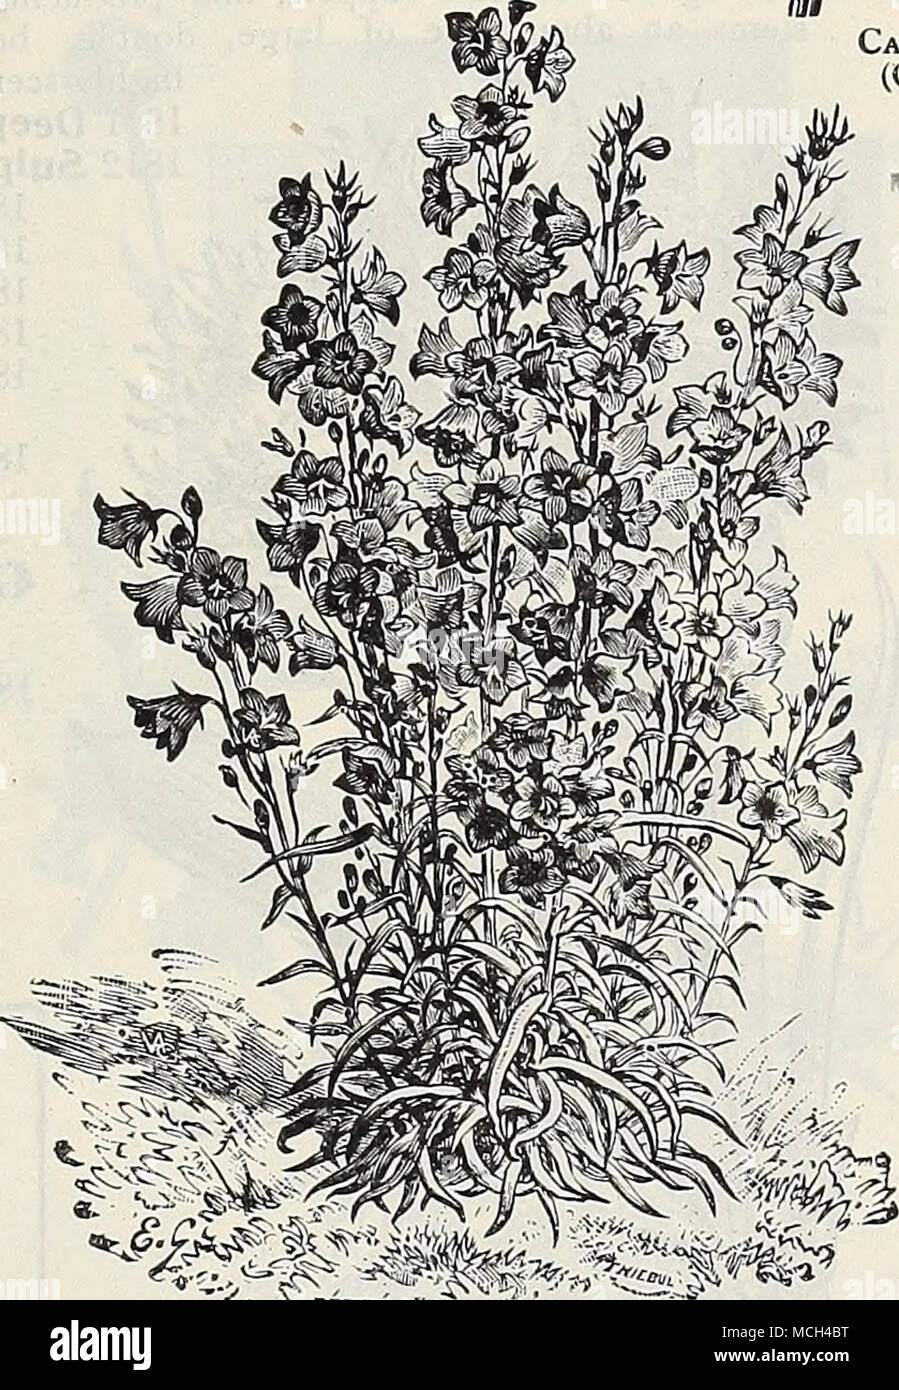 . â ^^^^t^y^iii^ Campanula Persicifolia Grandiflora. V CANDYTUFT. Campanula Media Calycanihema. (Cup and Saucer Canterbury Bells.) Canterbury Bells. V*^ (Caiii})anula Media.) Calycanthema [Cup and Saucer Canlerbiny Bells). This is unques- tionably the finest type of this old- fnshioned and much prized garden plant. The increasing demand has induced us to oft'er it in separate colors as well as in mixture, viz.: PER PKT. 1731 Rose. Delicate rosy-pink. 10 1738 Blue, A fine, clear shade. 10 1734 Striped. White striped blue 10 1735 White. Pure white 10 1732 Finest Mixed. All colors of the Cup and  Stock Photo